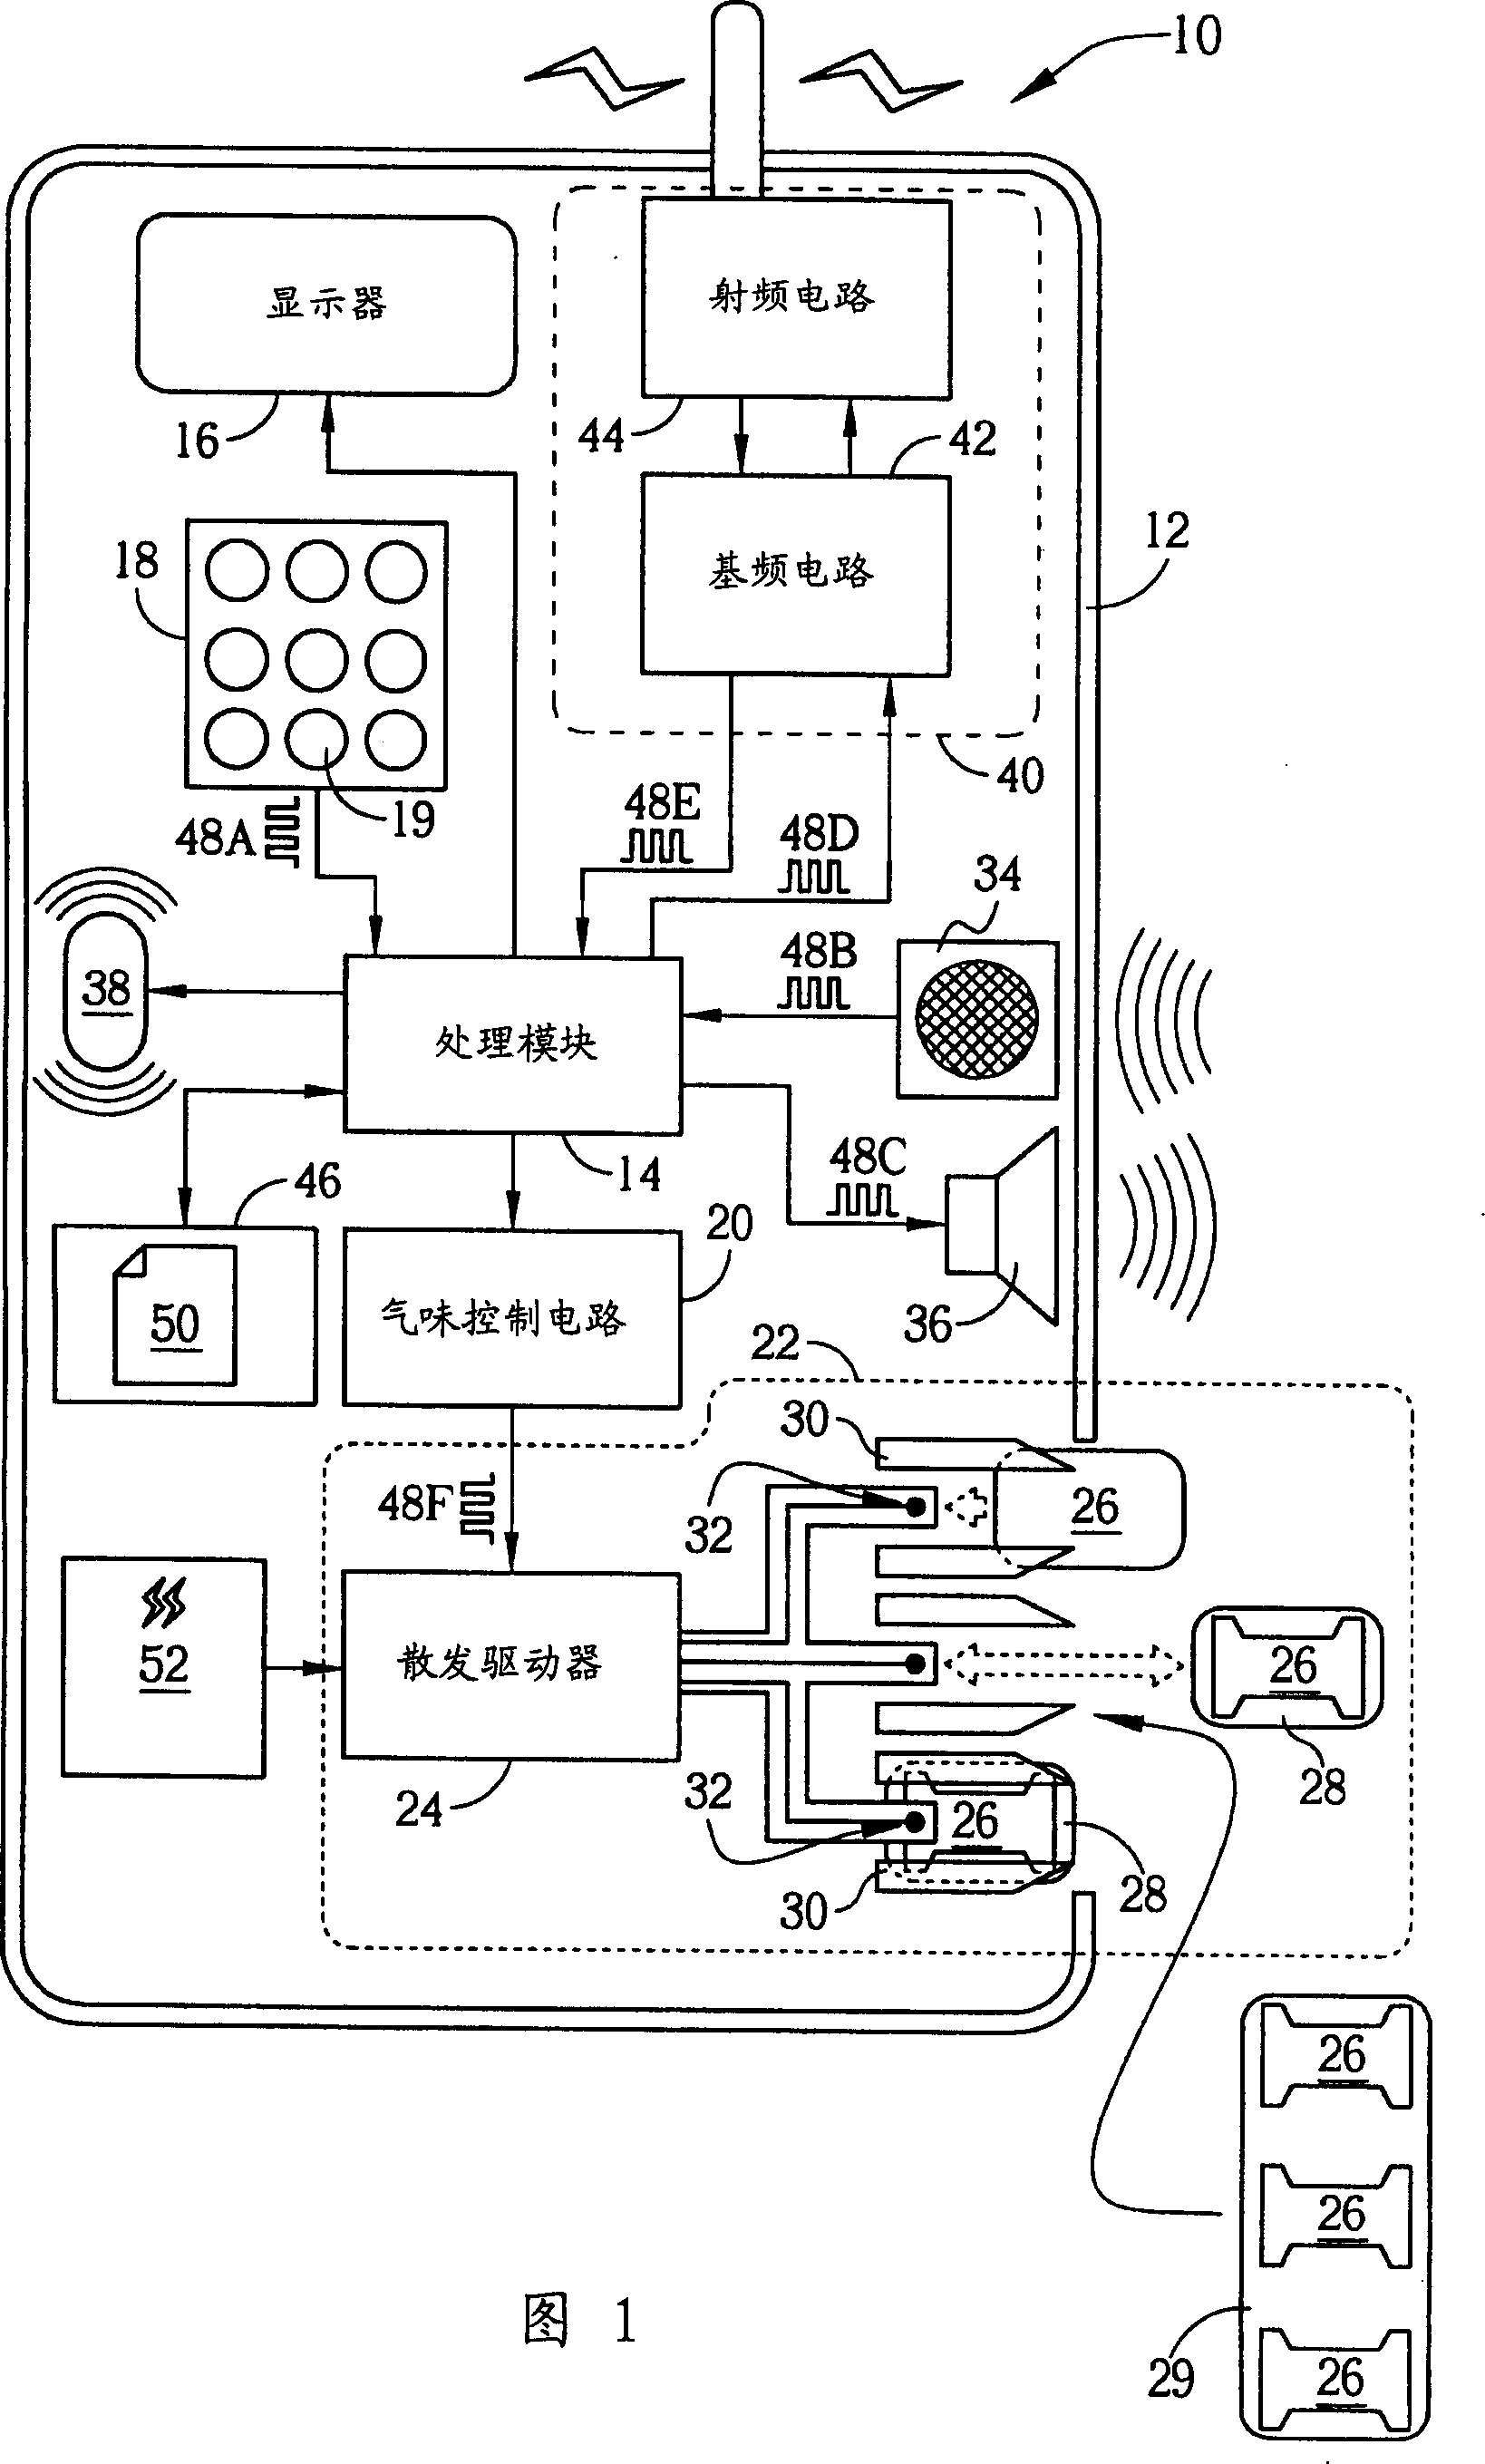 Information device with interactive smell man-machine interface